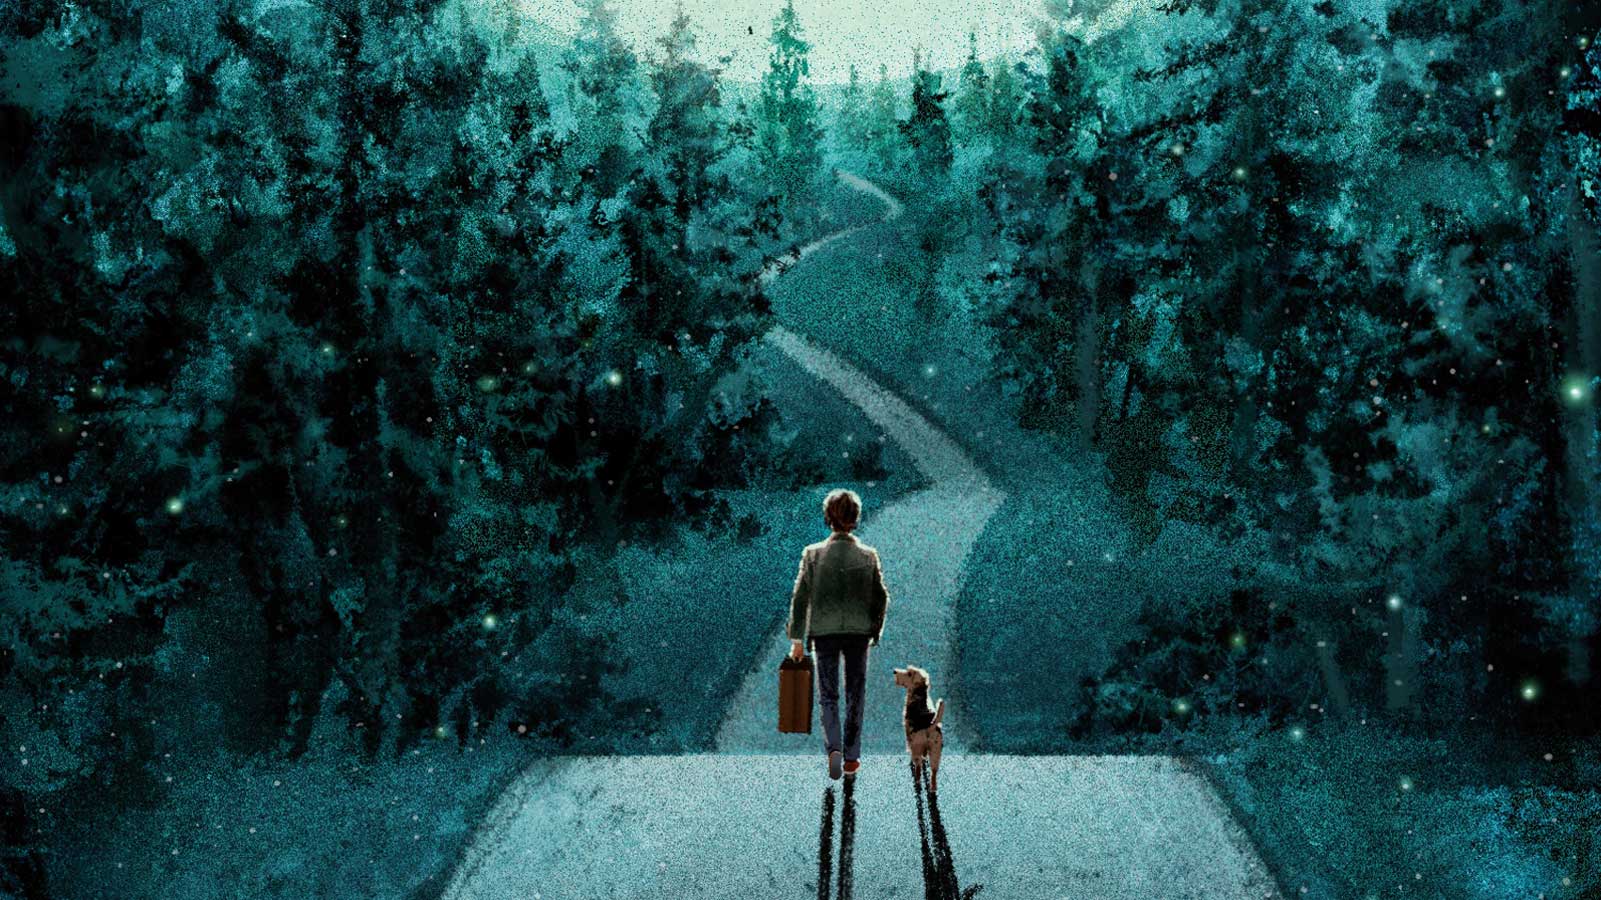 Illustration of a young boy and dog on a road under a starry sky